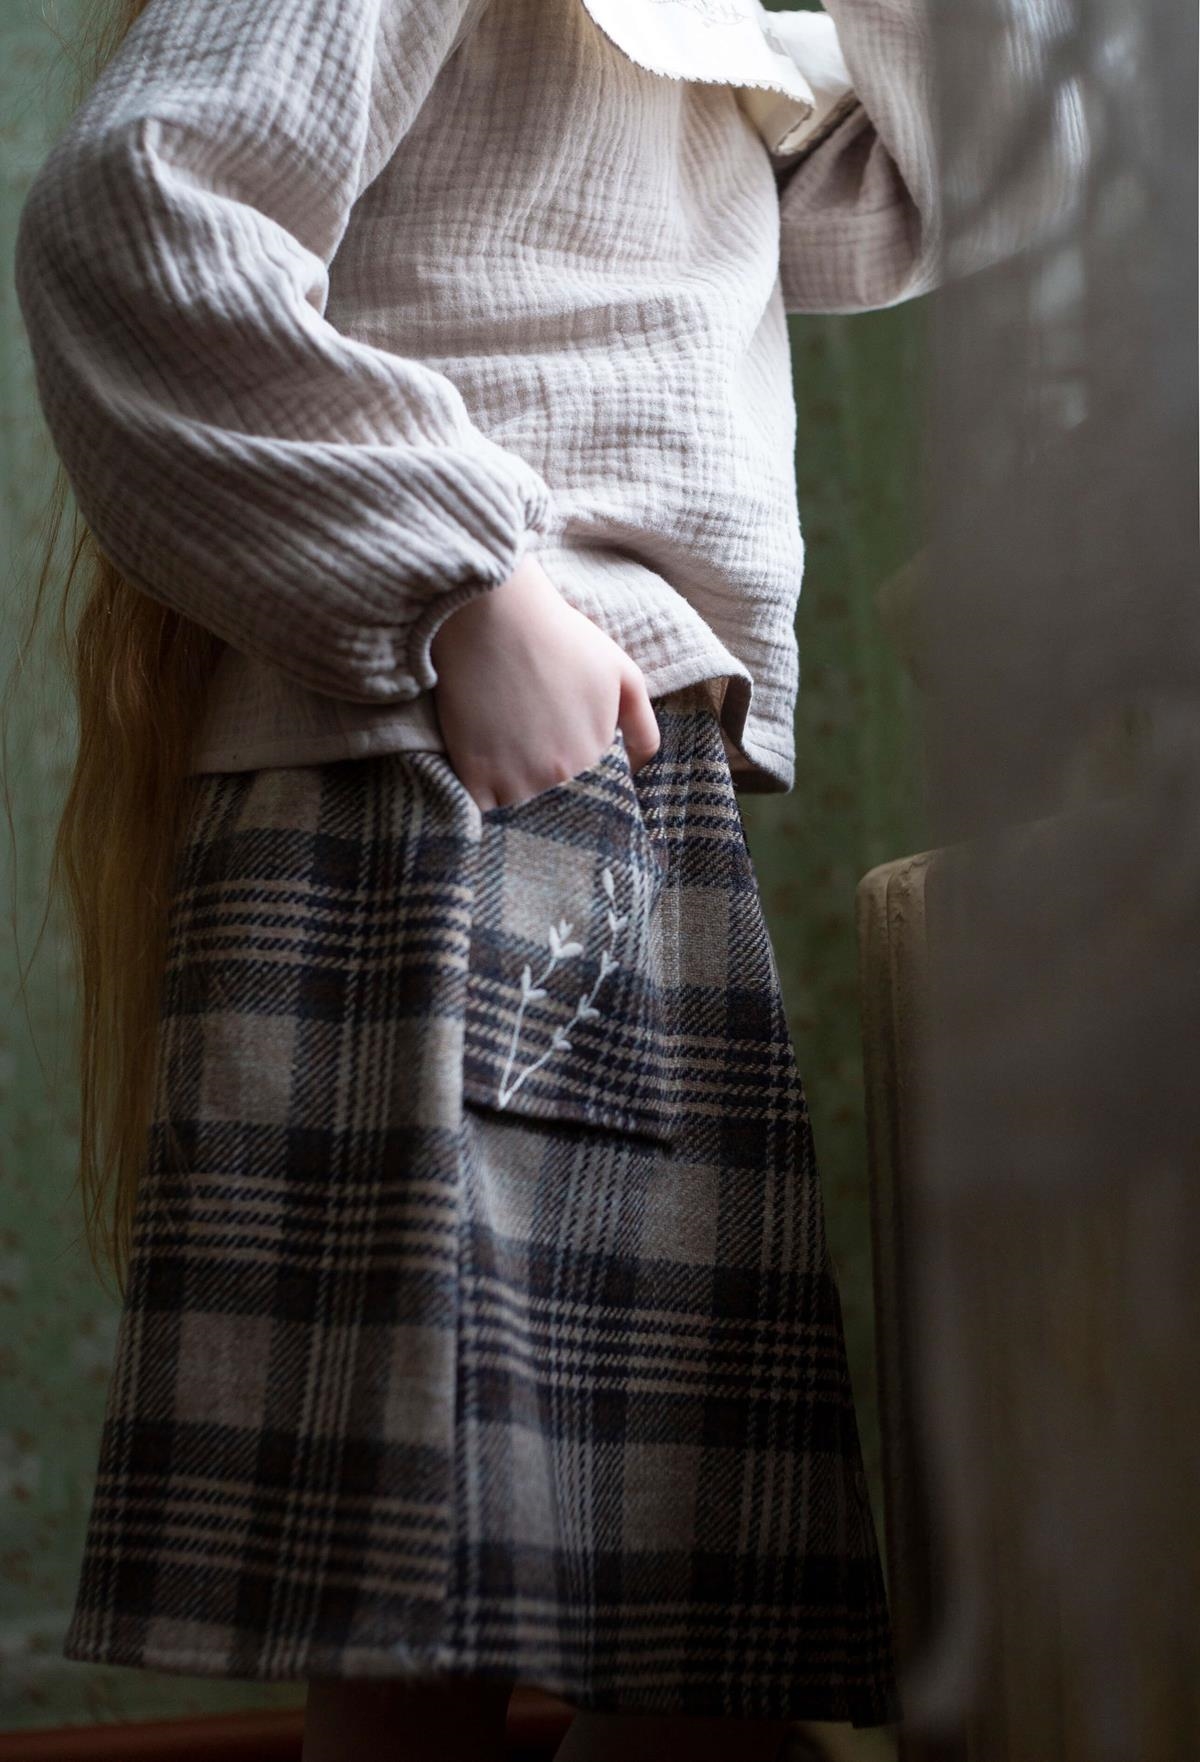 Mod.19.3 Brown plaid skirt with embroidered pocket | AW22.23 Mod.19.3 Brown plaid skirt with embroidered pocket